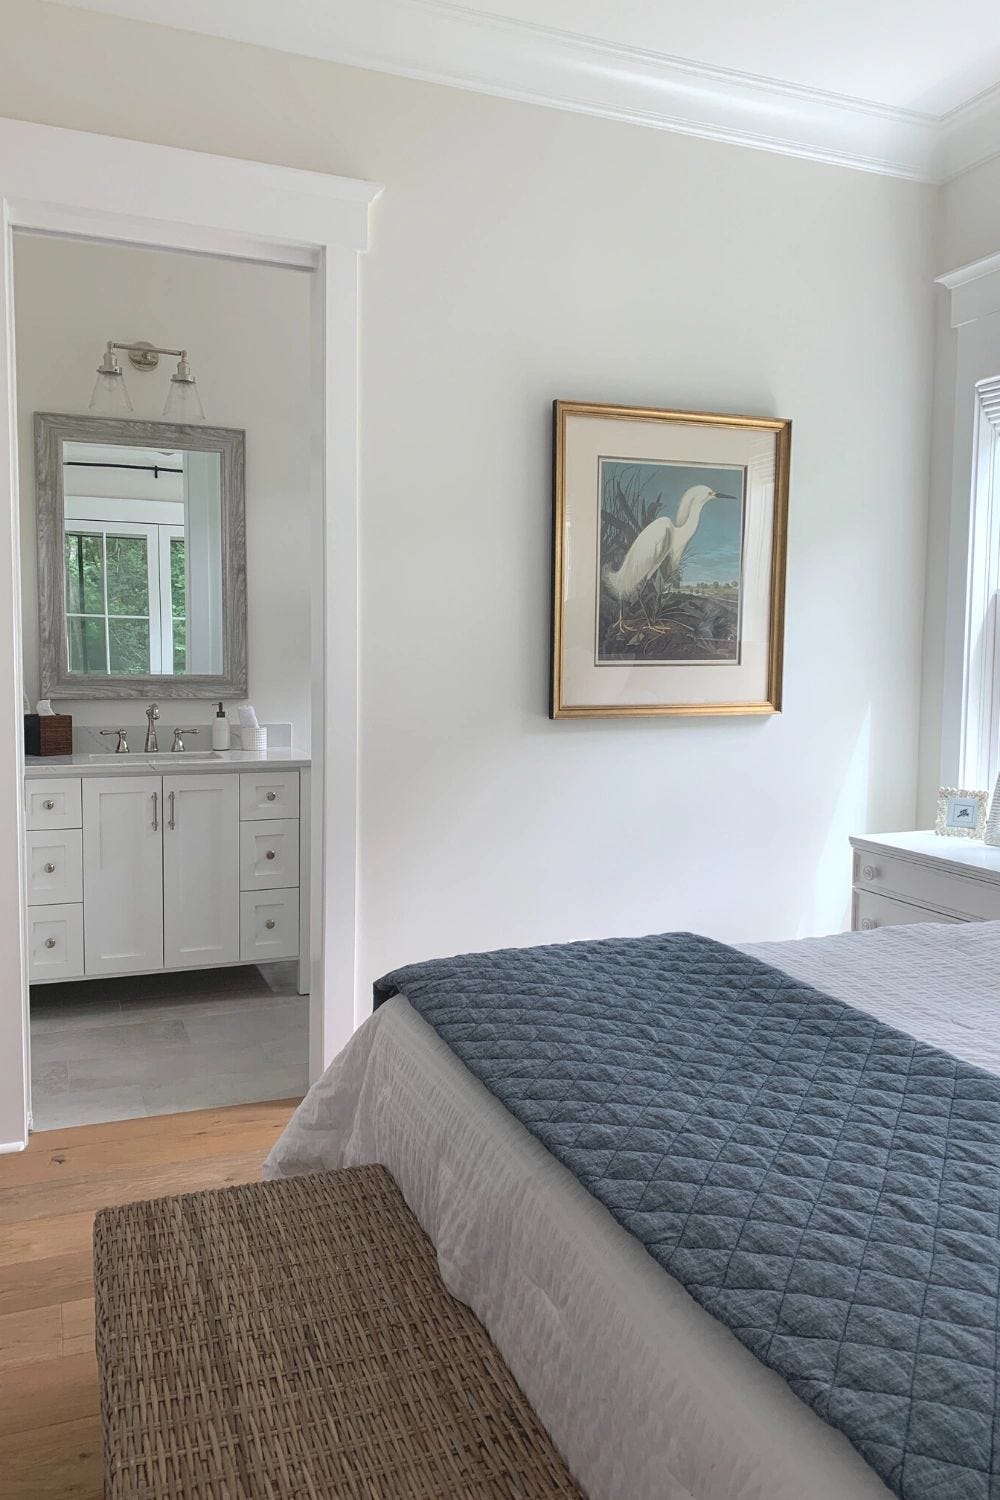 Our guest bedroom with an attached bathroom has a cool coastal feel and came together through about 100 design decisions. :)